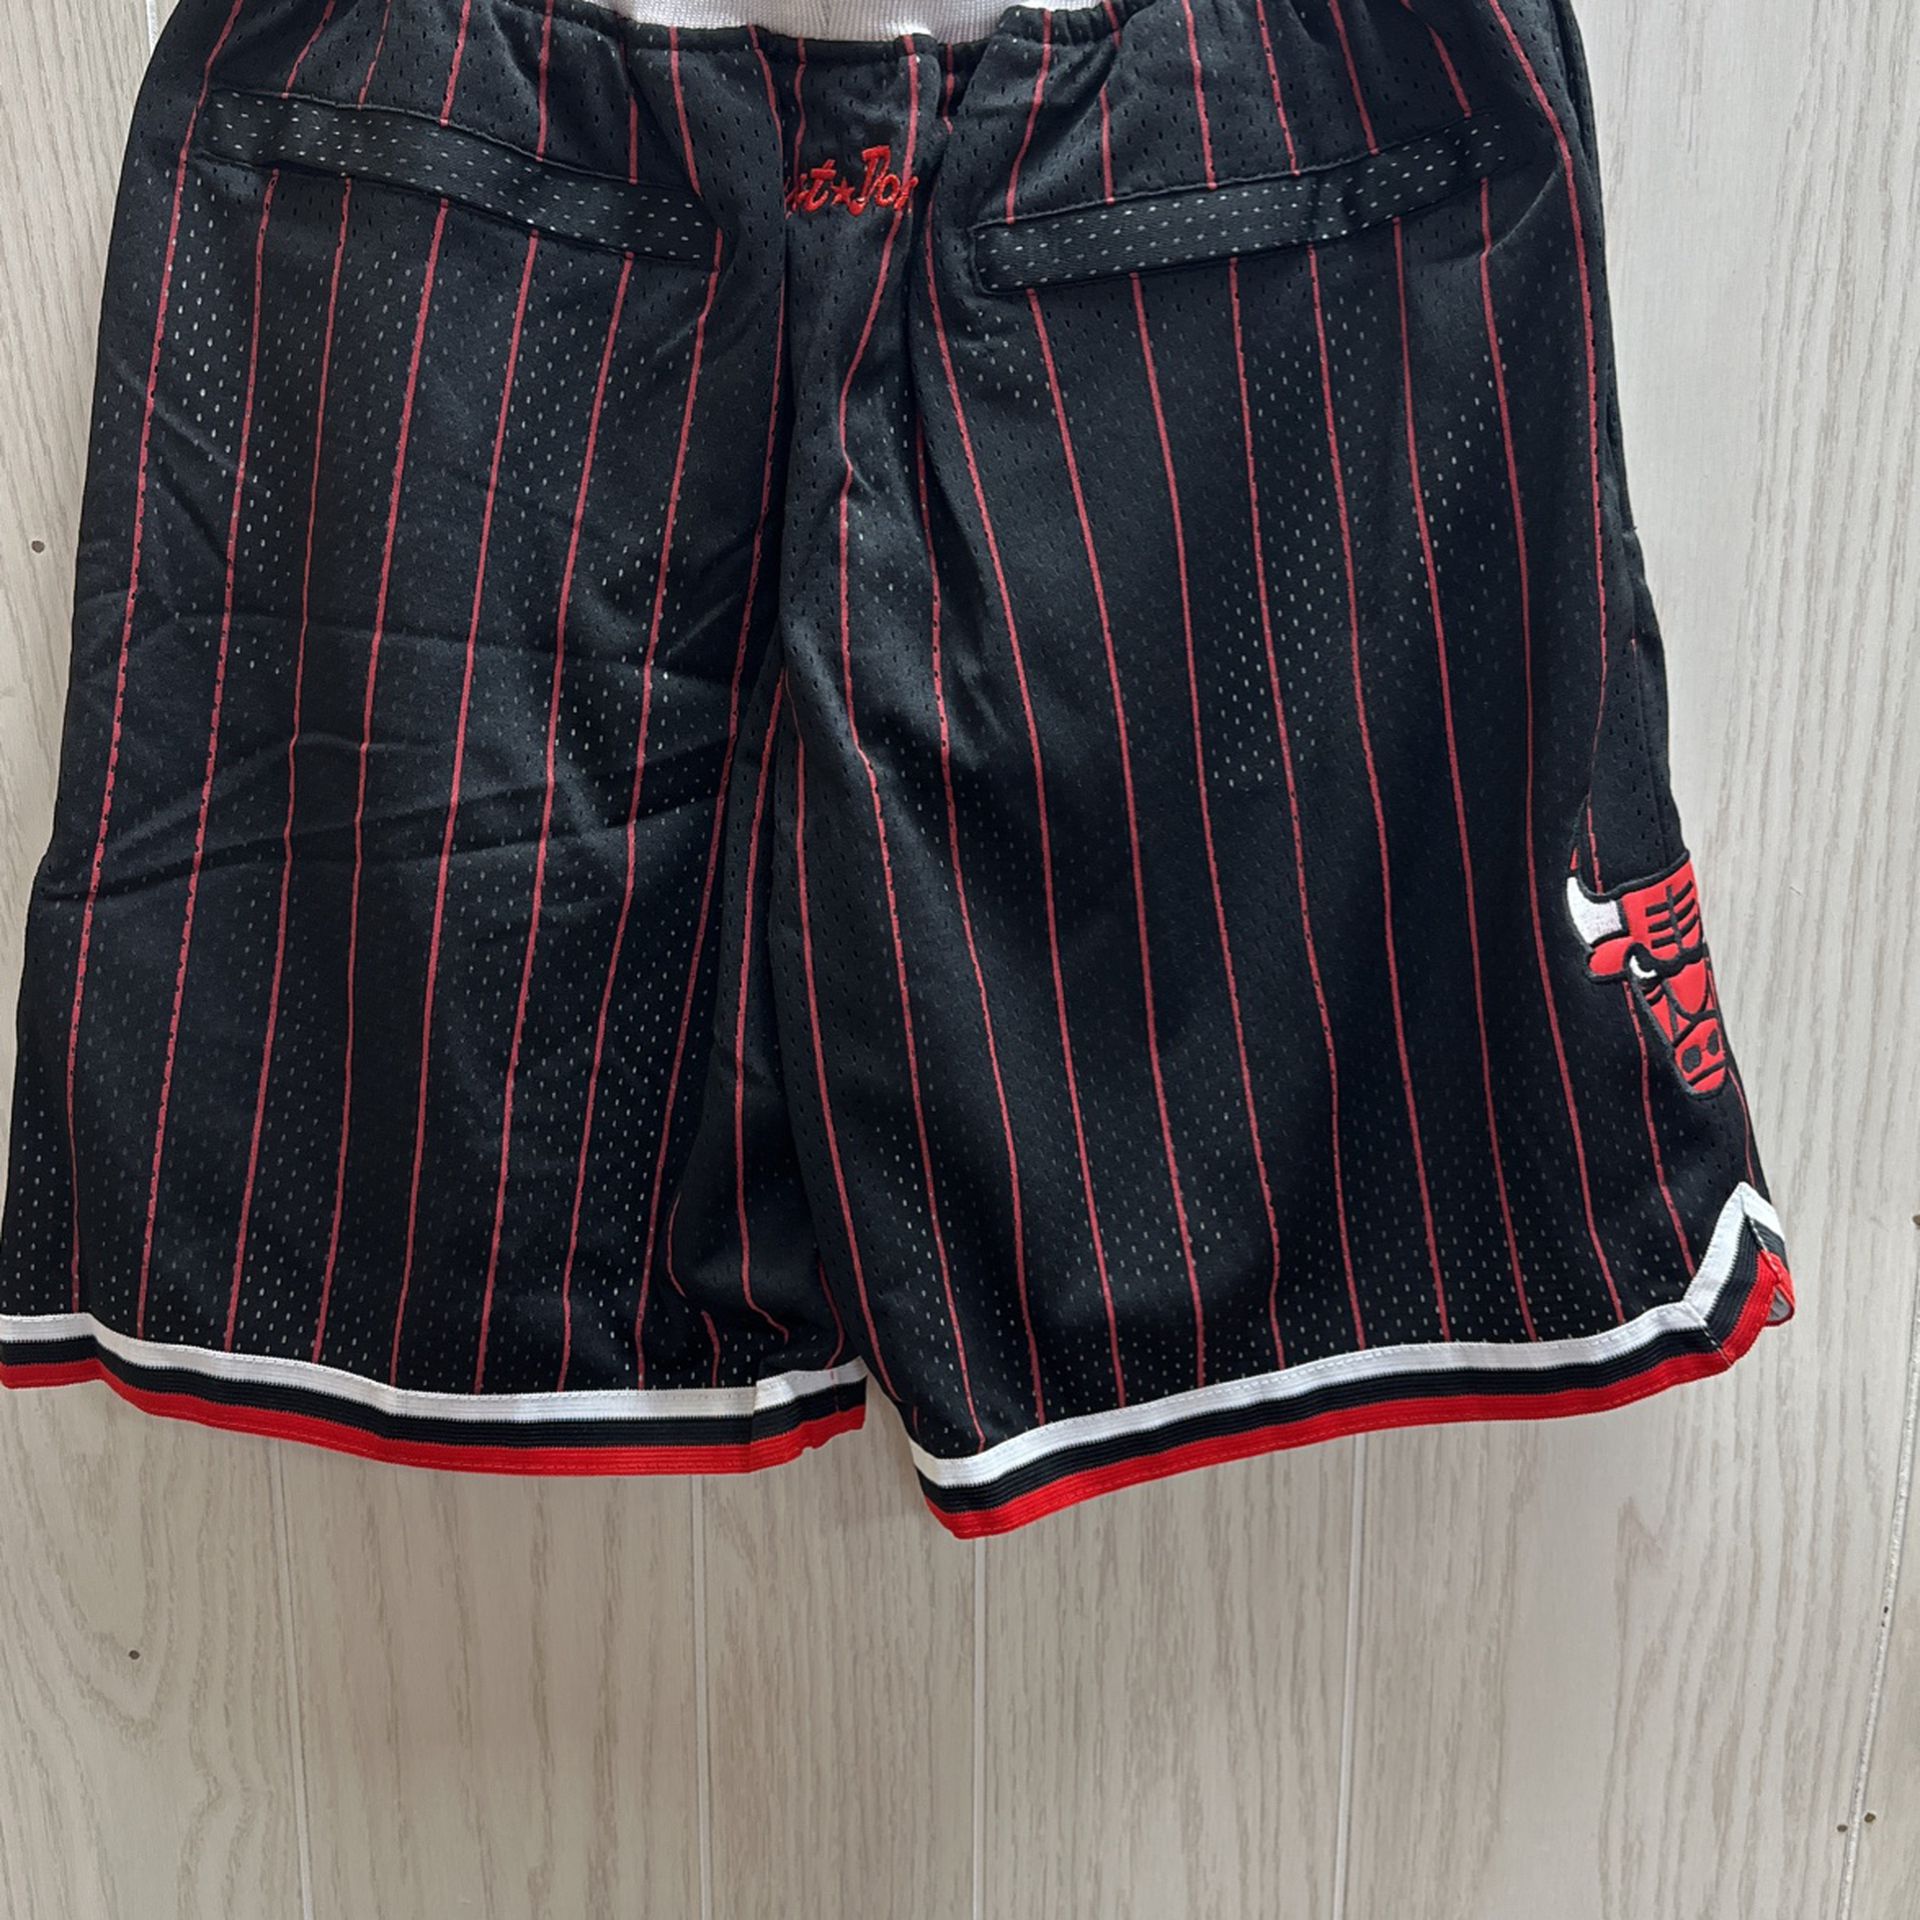 NOW on SALE! 50% OFF! Authentic Quality Just Don Shorts 🔥 #nba